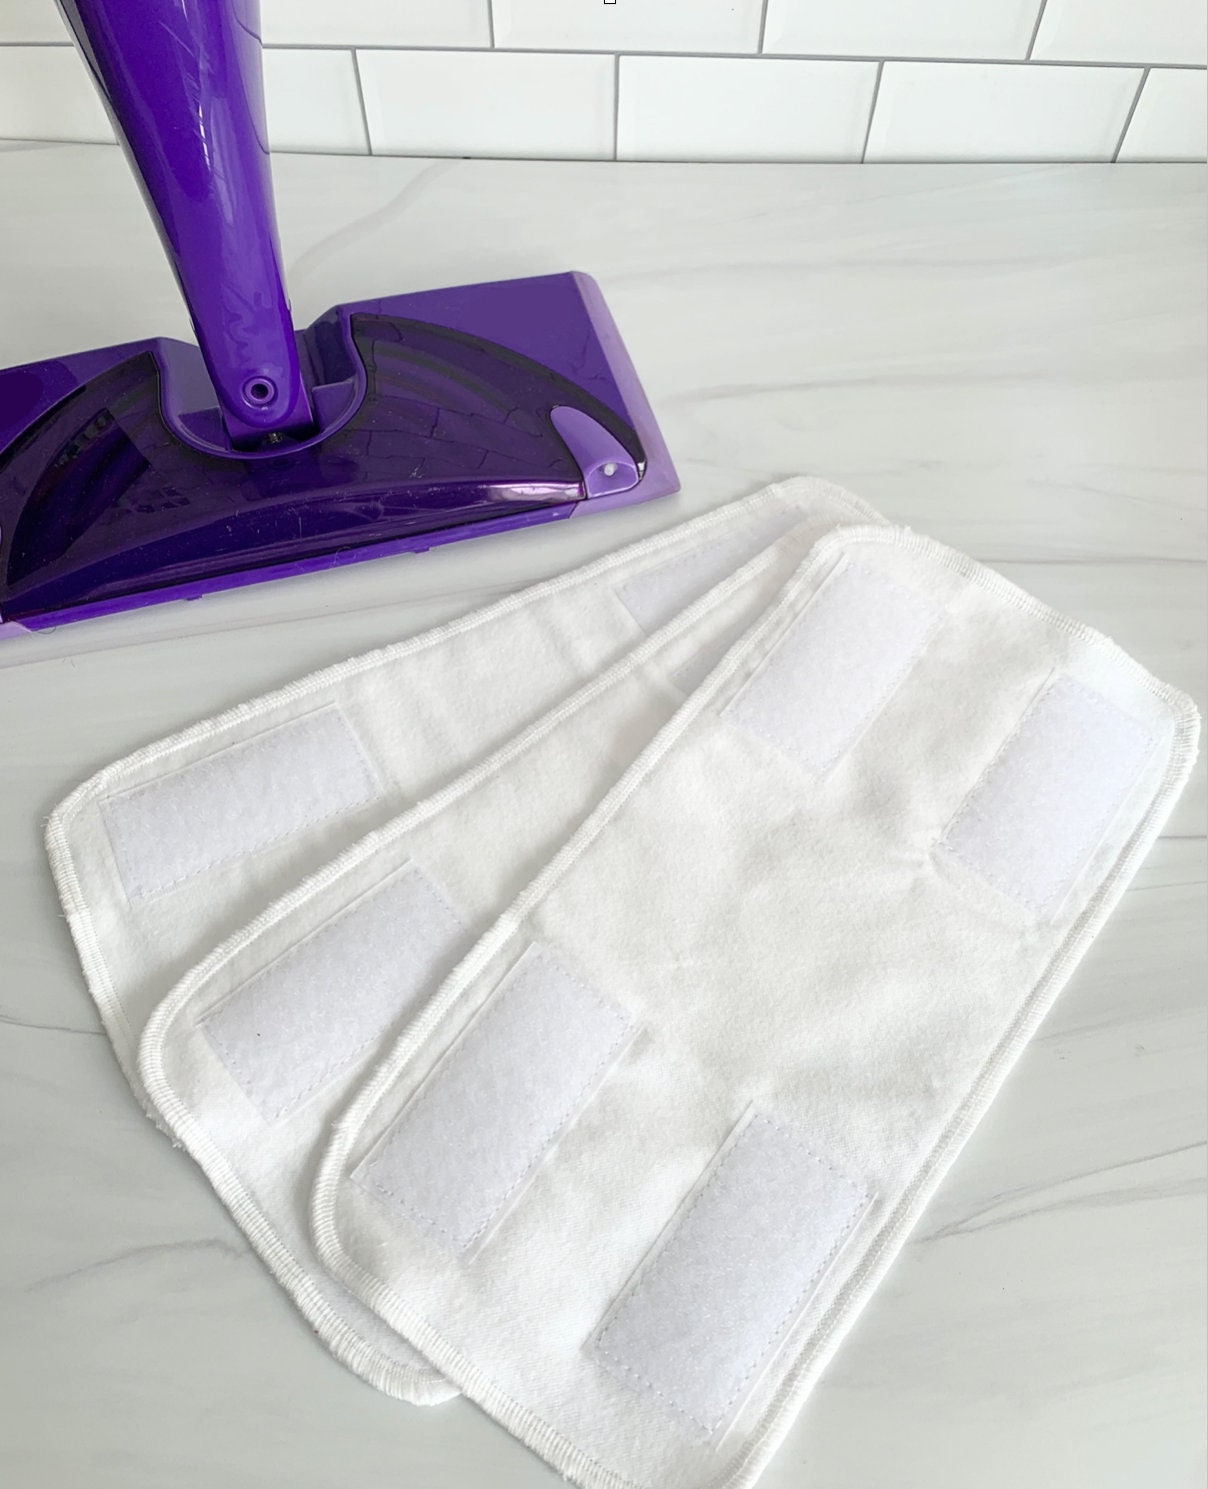 Washable Mop Covers, Reusable Cotton Mop Covers, Compatible With